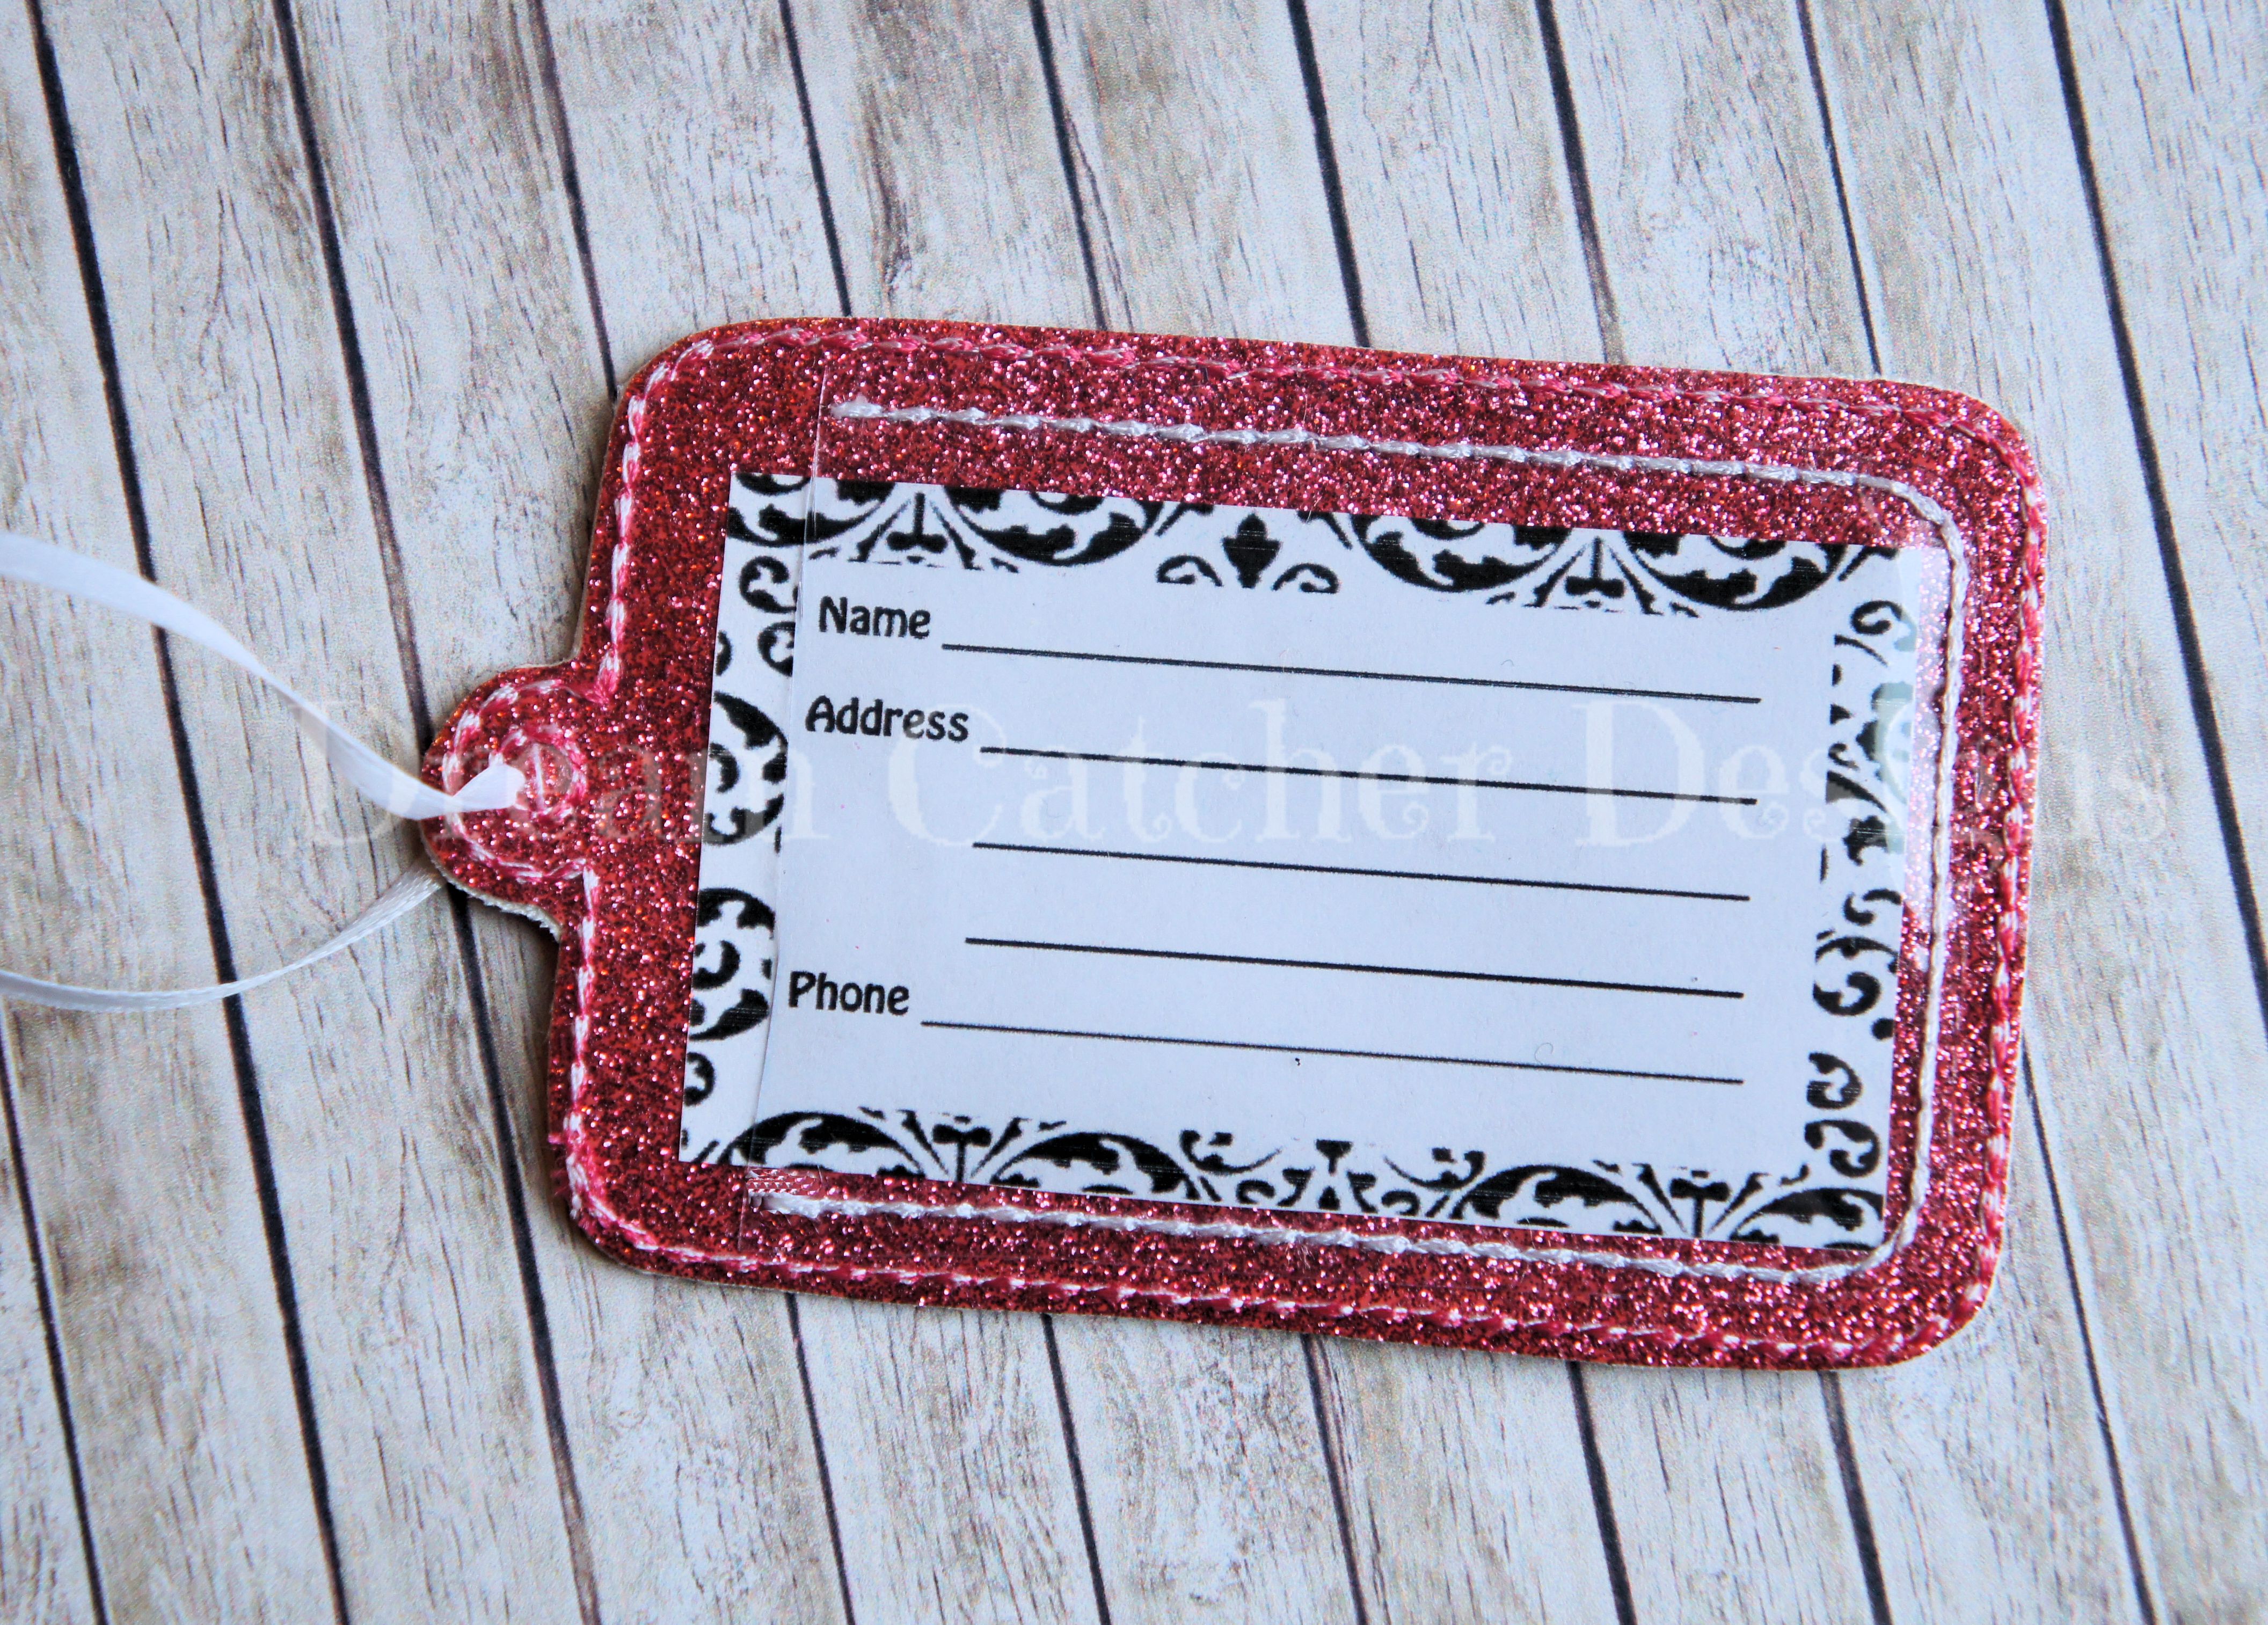 embroidered personalized luggage tags